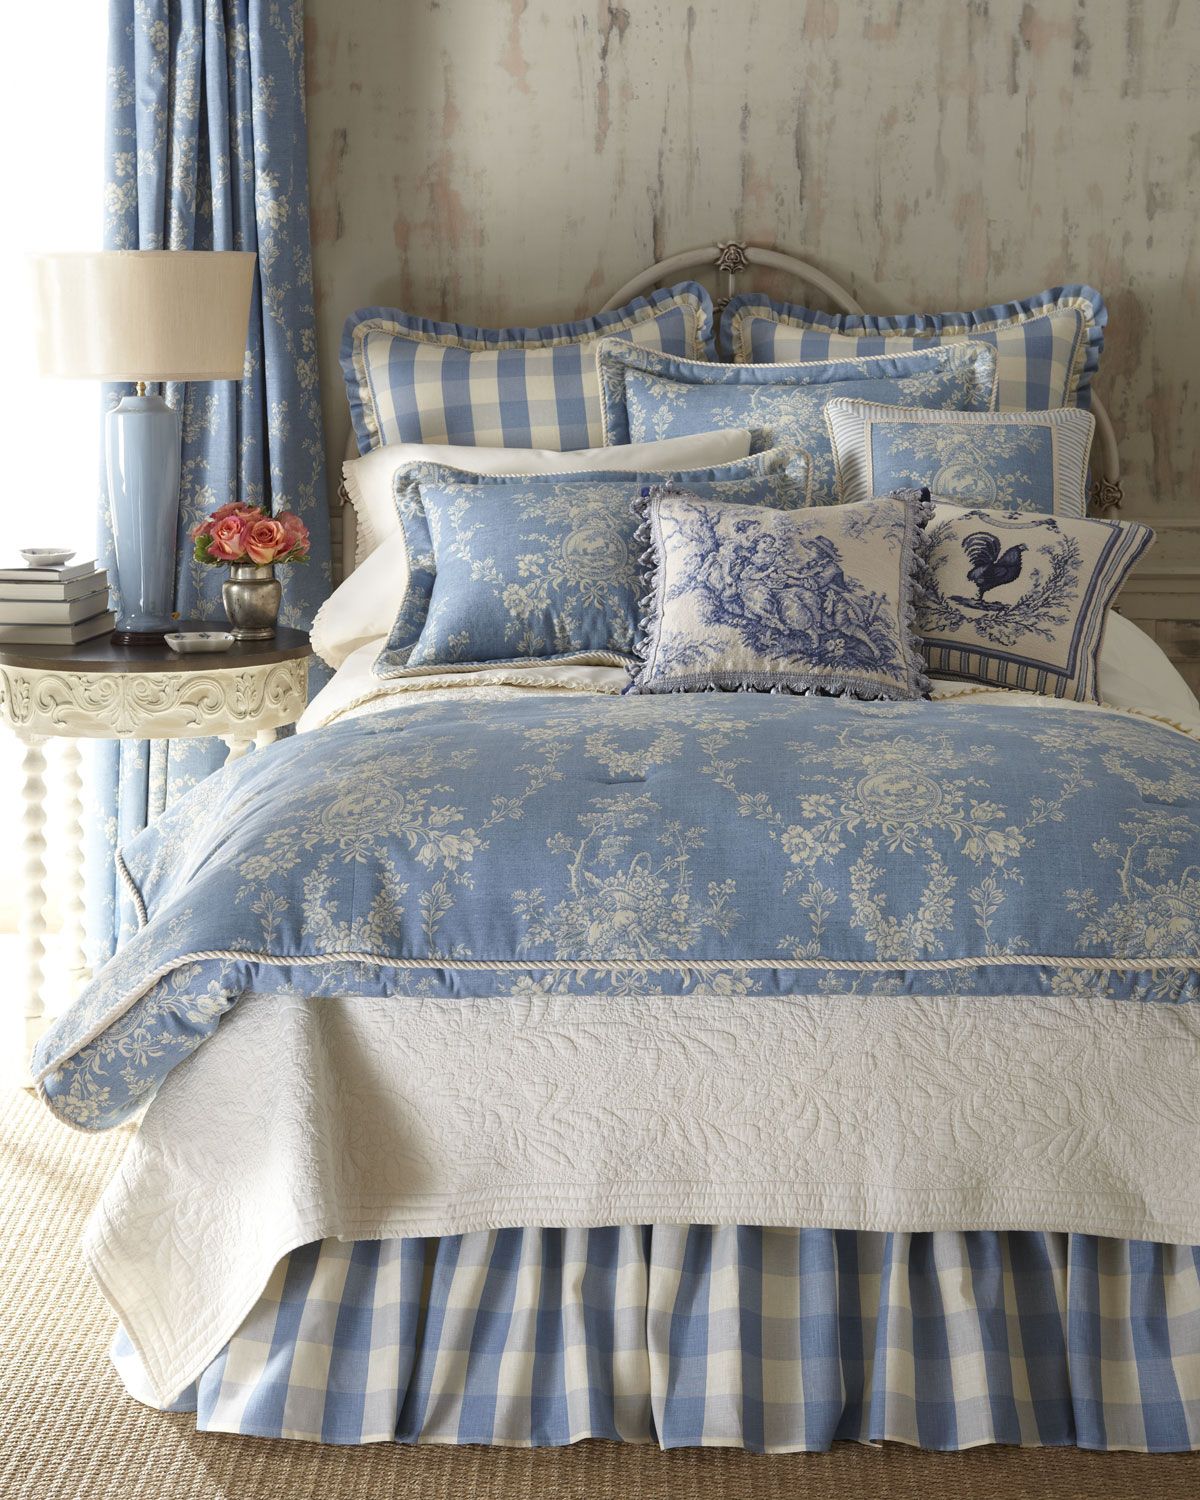 blue and white country bedrooms photo - 9